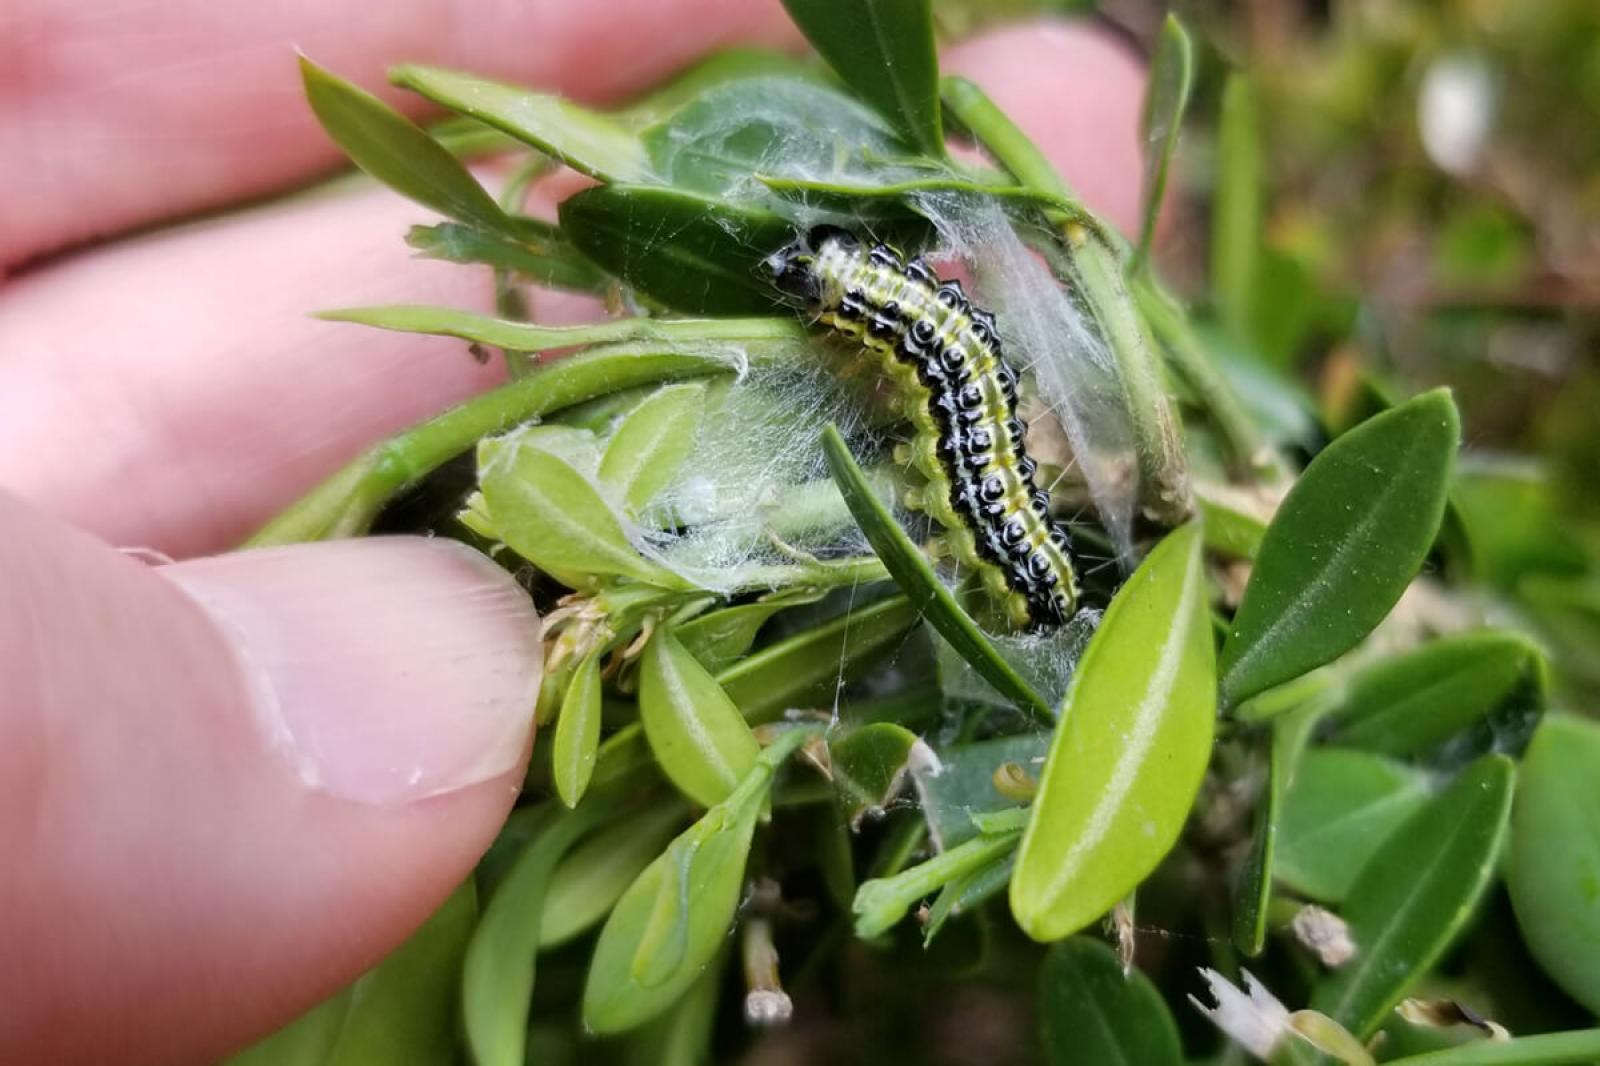 Carefully pull apart webbed leaves and twigs to look for green larvae with black spots and a black head. (Photo: J. Llewellyn)